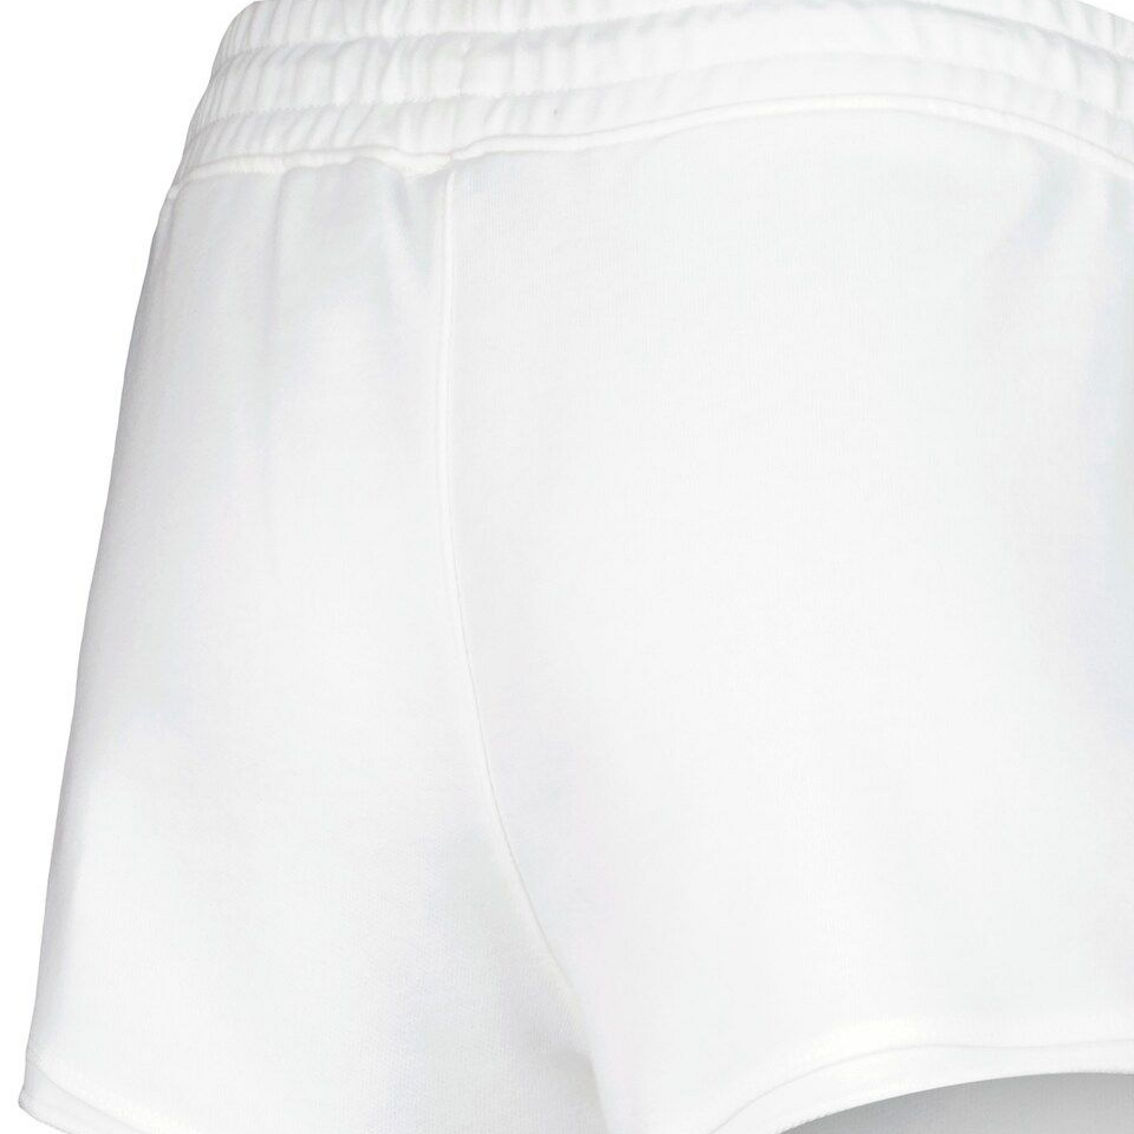 Concepts Sport Women's White Golden State Warriors Sunray Shorts - Image 4 of 4